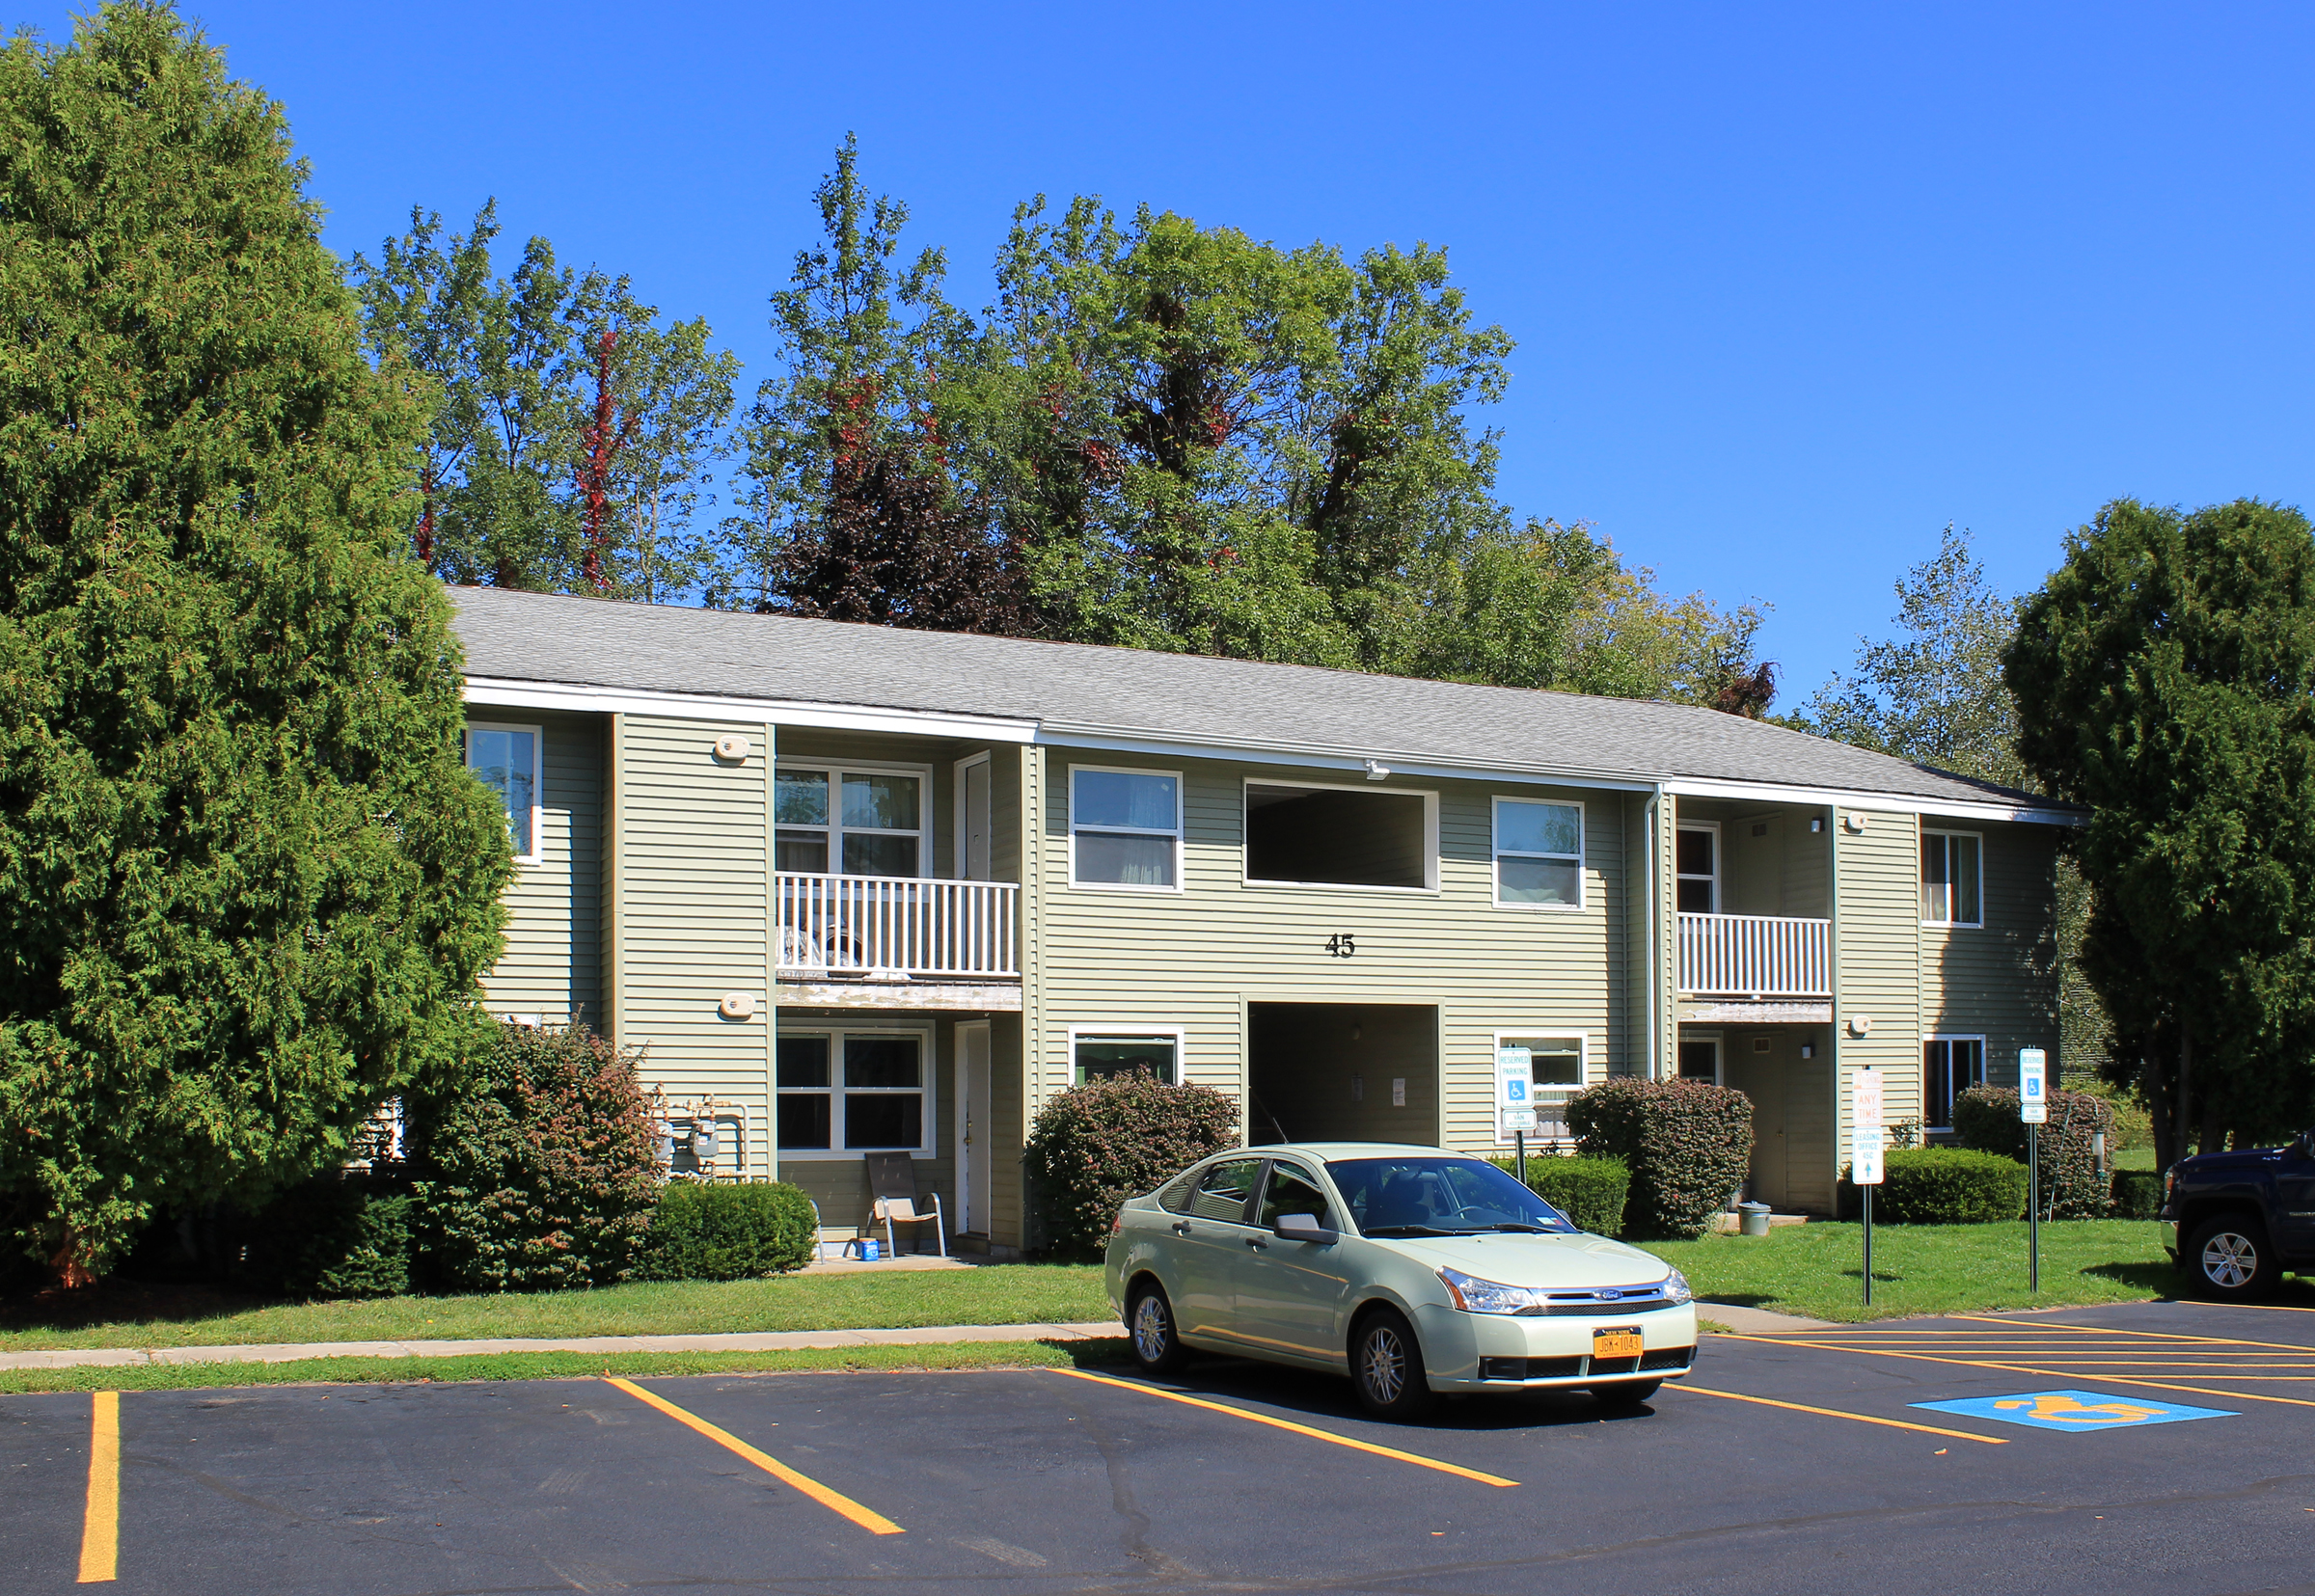 property management company client list syracuse ny welcome image of wine creek apartments